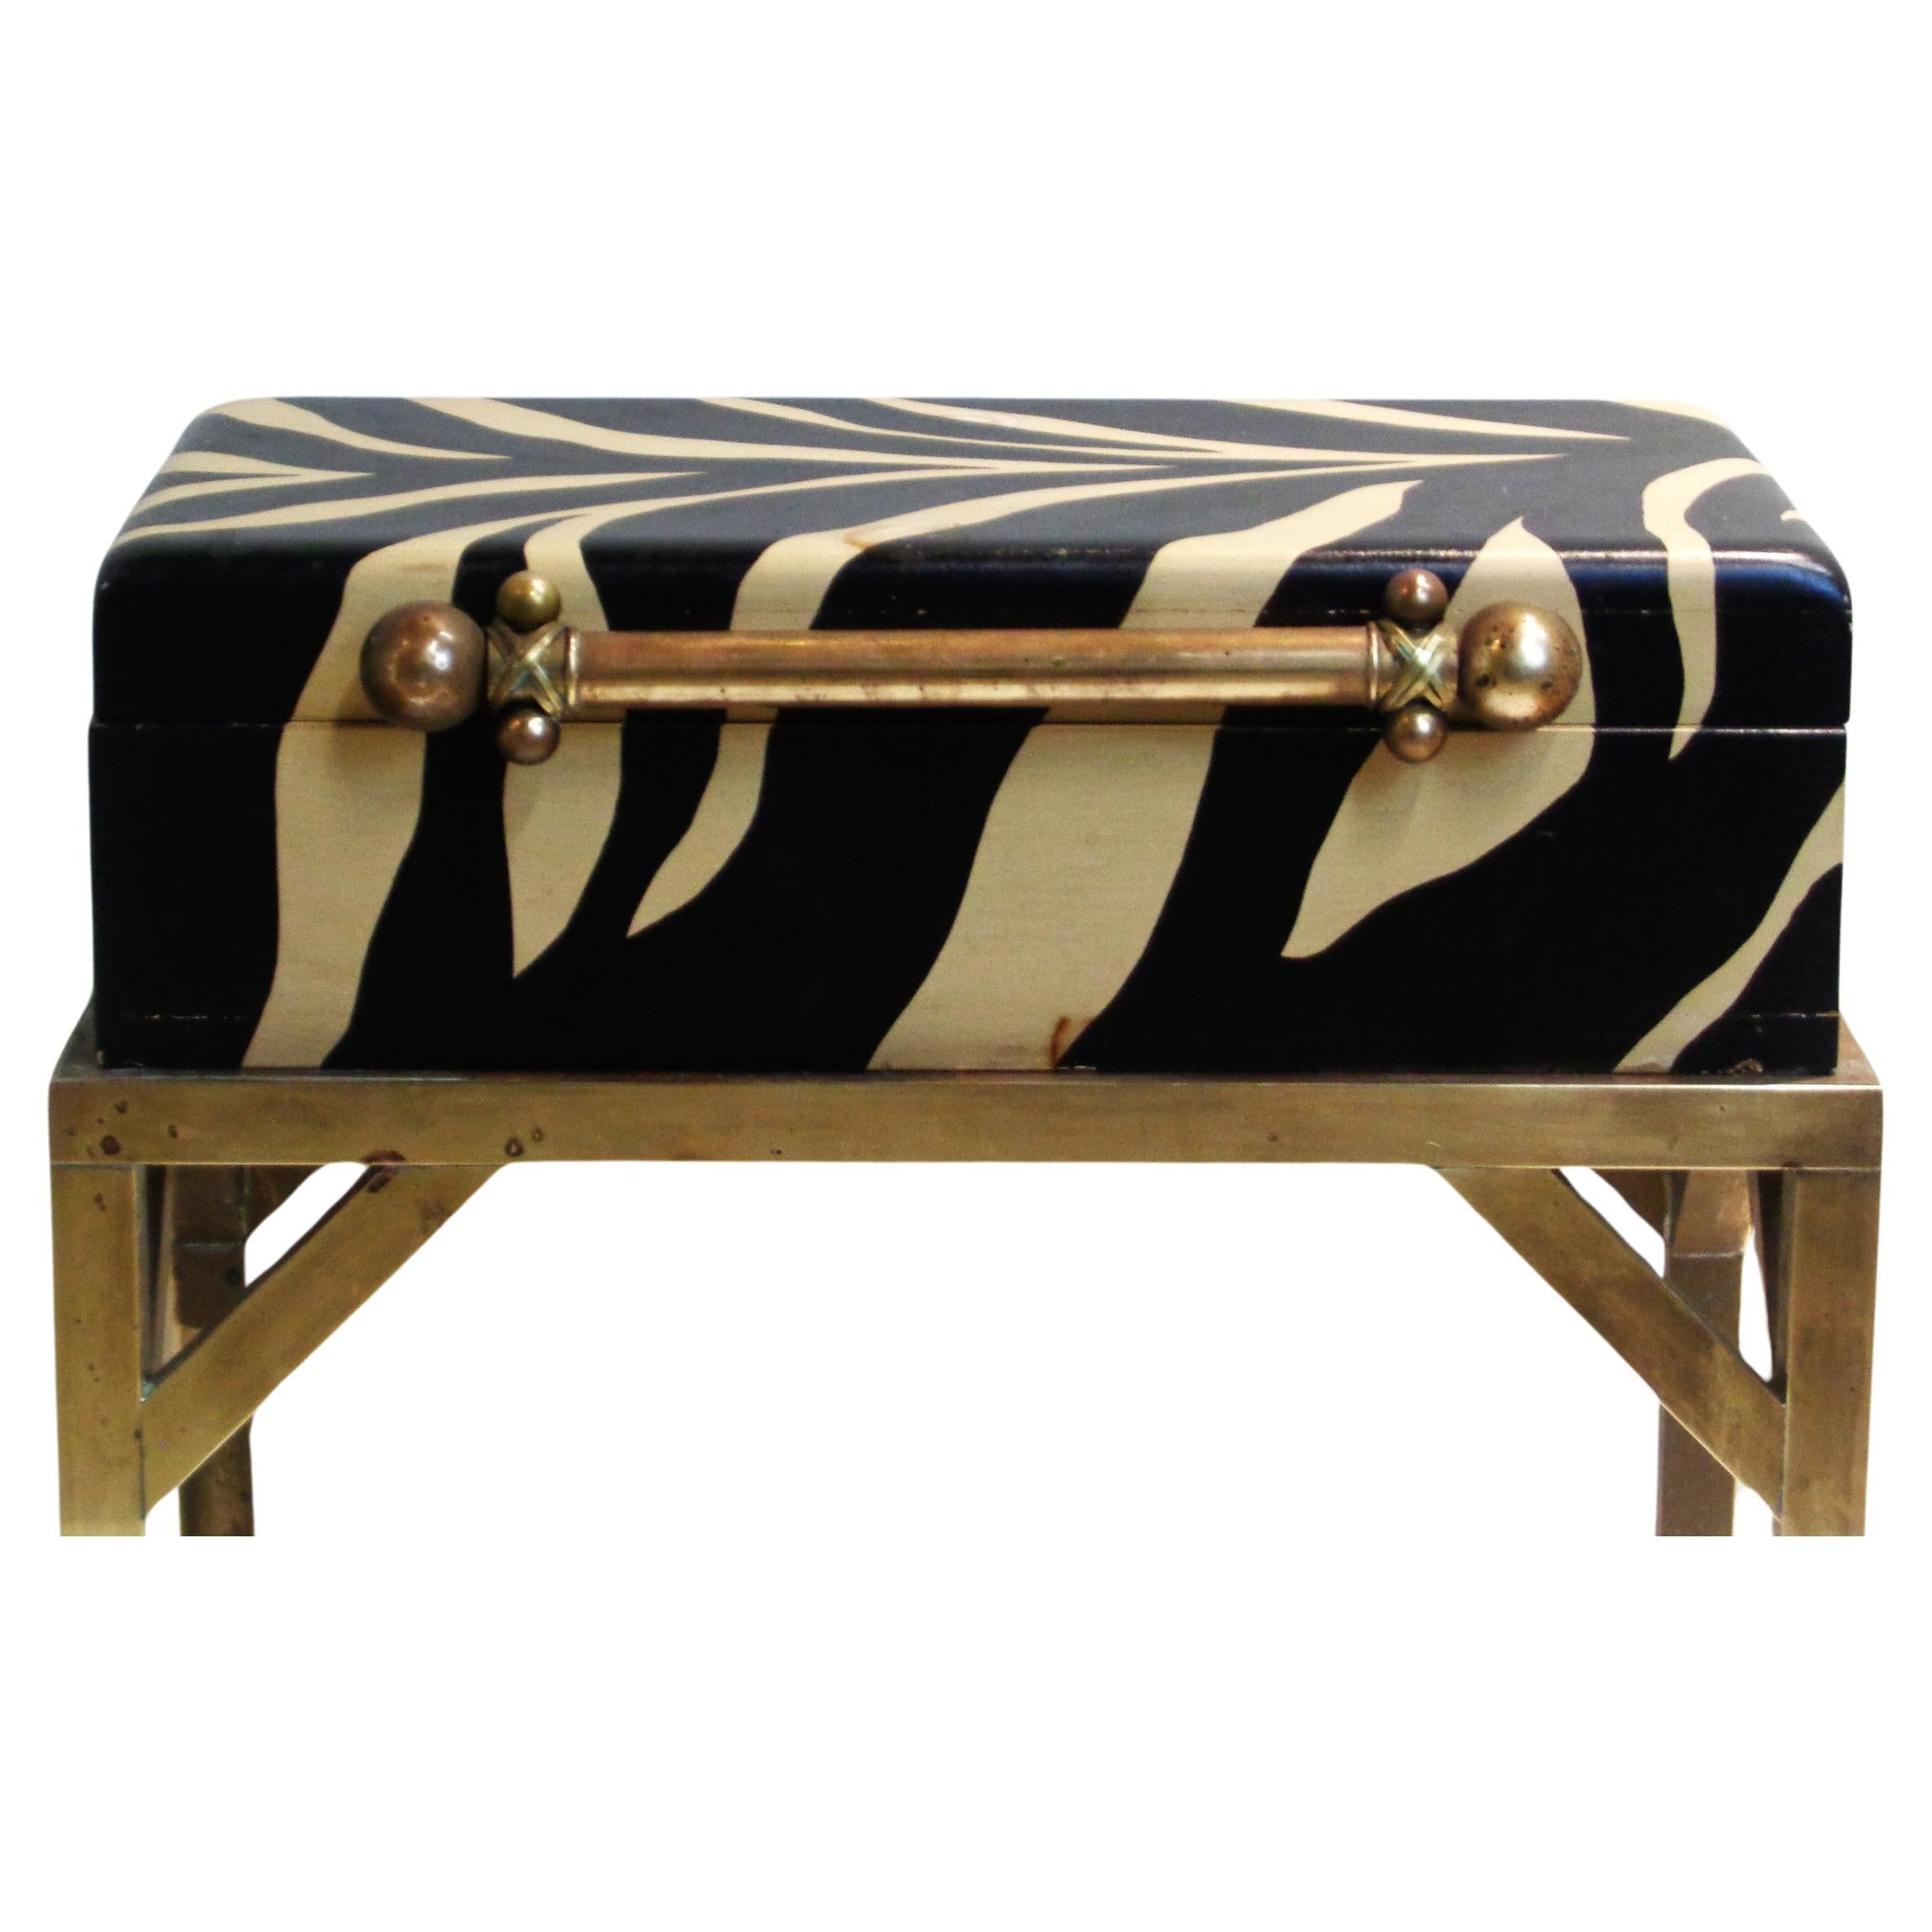  Faux zebra painted lidded wood box with a beautifully designed brass handle. Box sets into the original fitted brass table stand. Box on stand measures 19